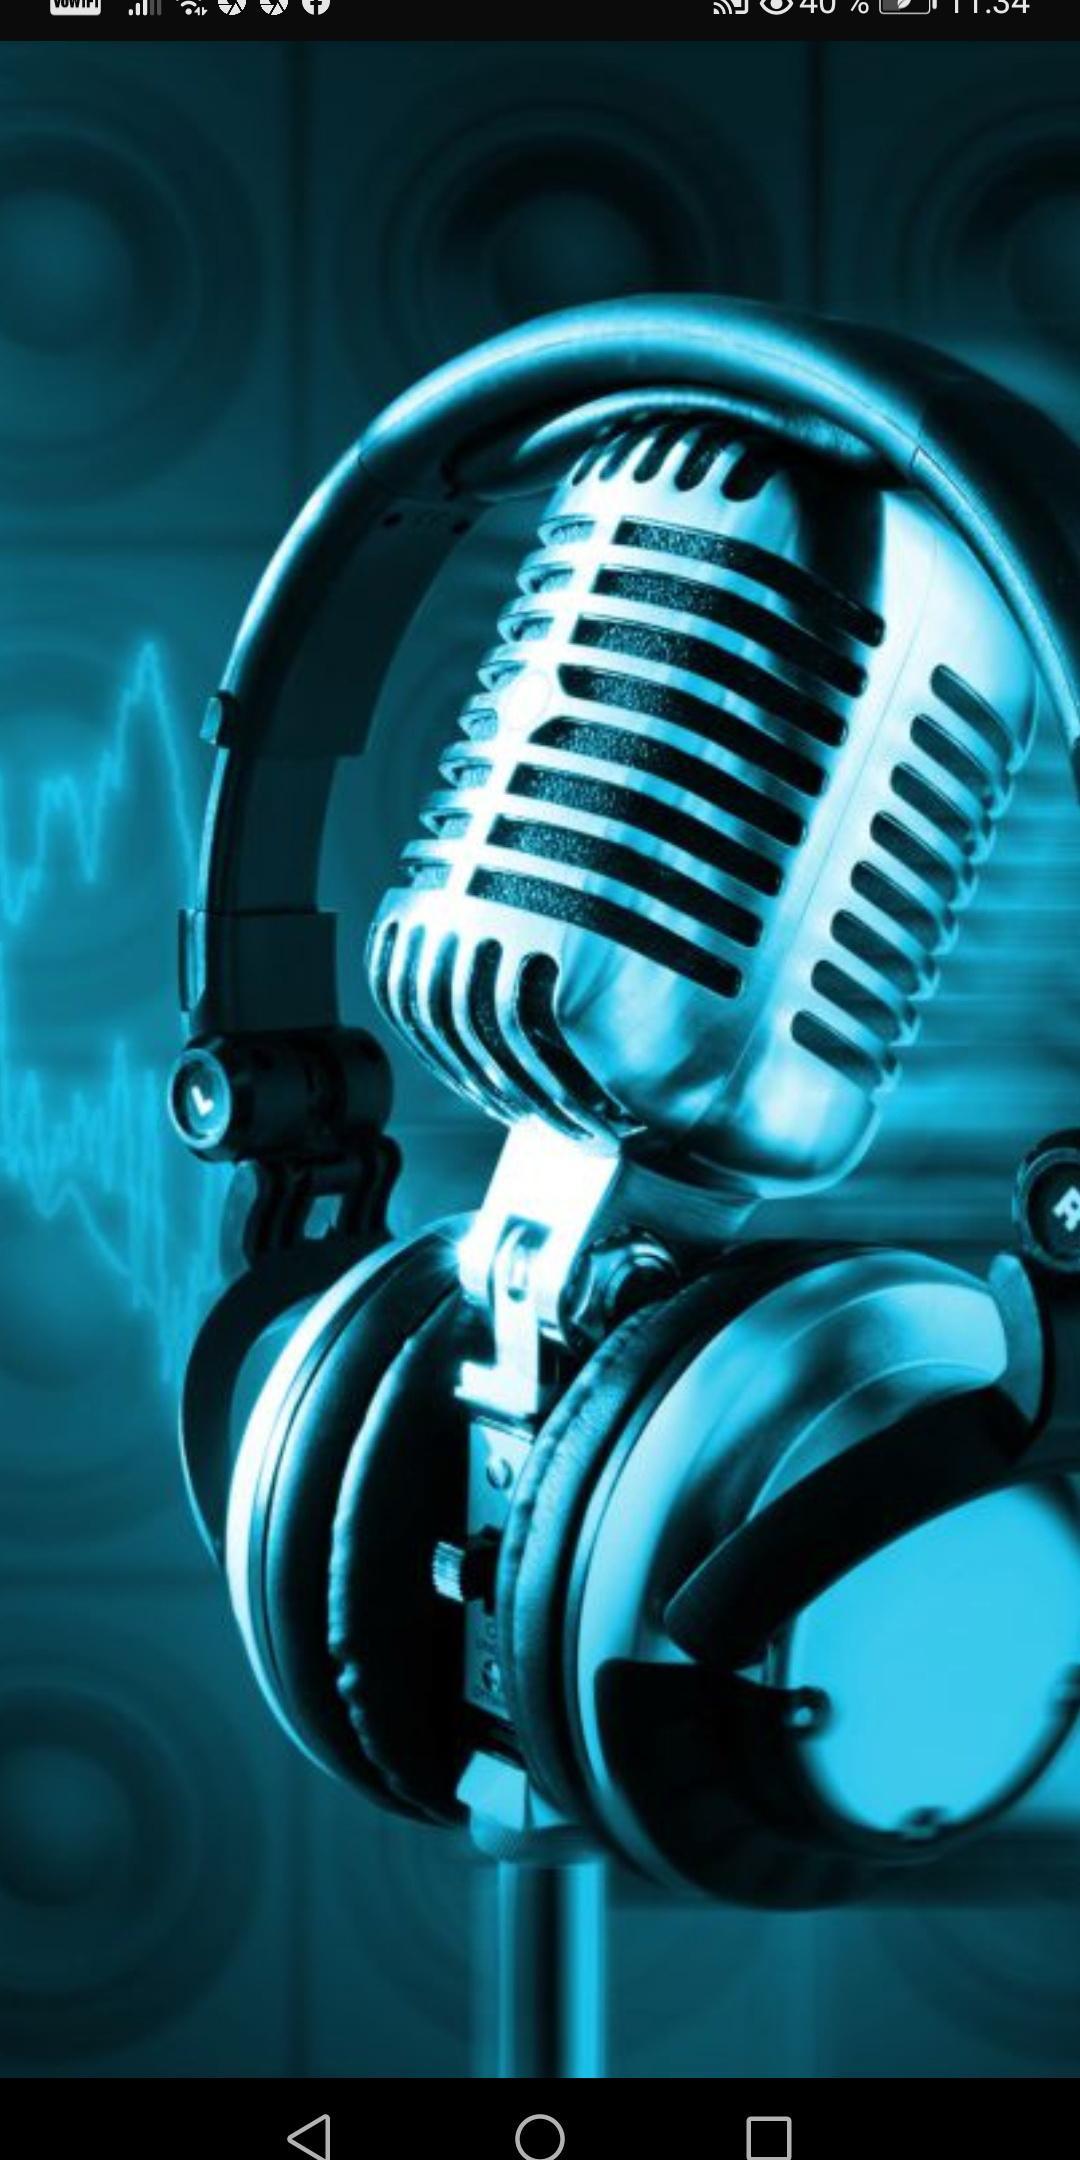 Cuban Radio Stations for Android - APK Download